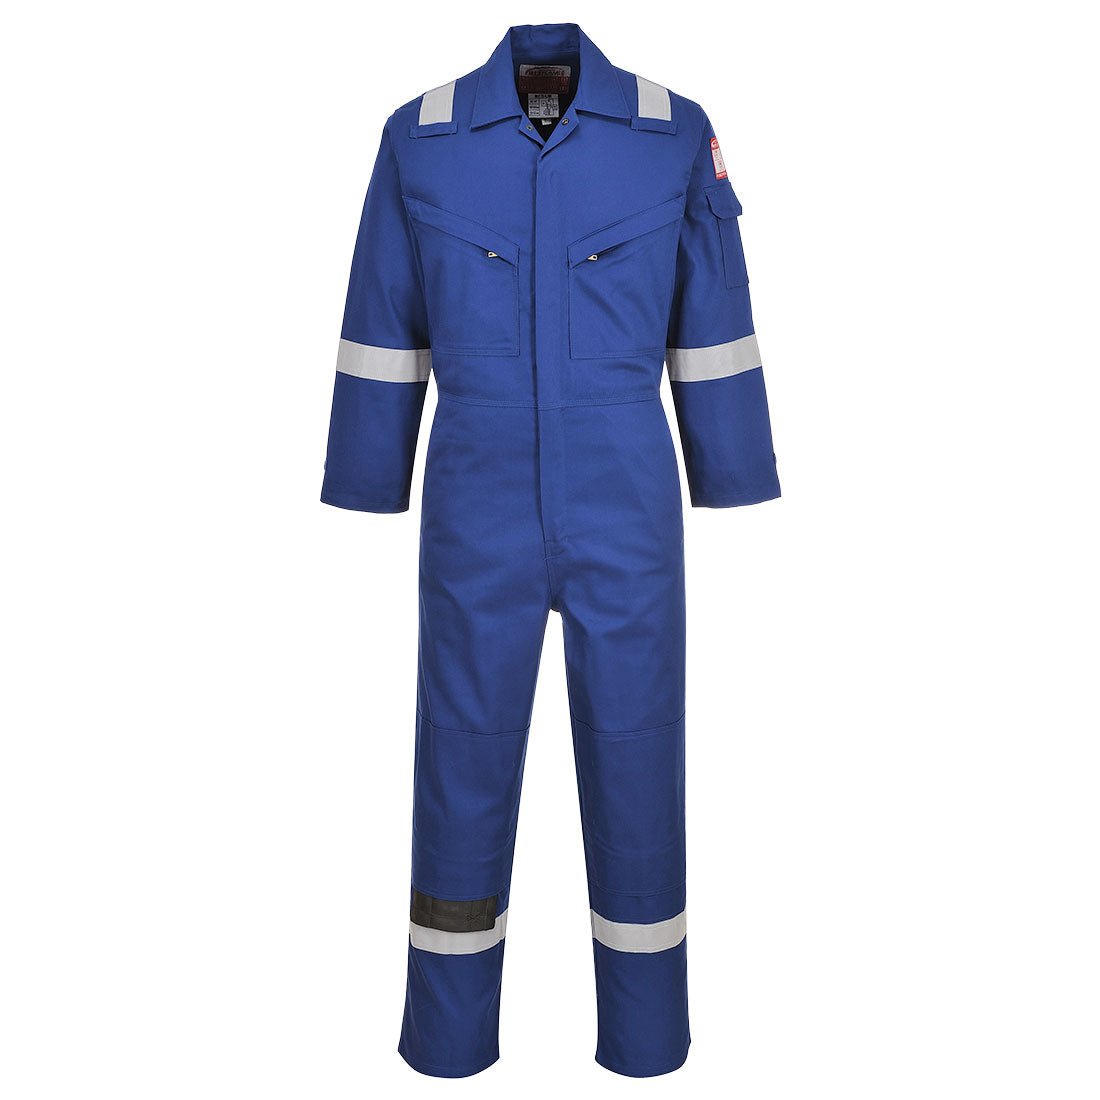 Flame Resistant Light Weight Anti-Static Coverall 280g - arbeitskleidung-gmbh